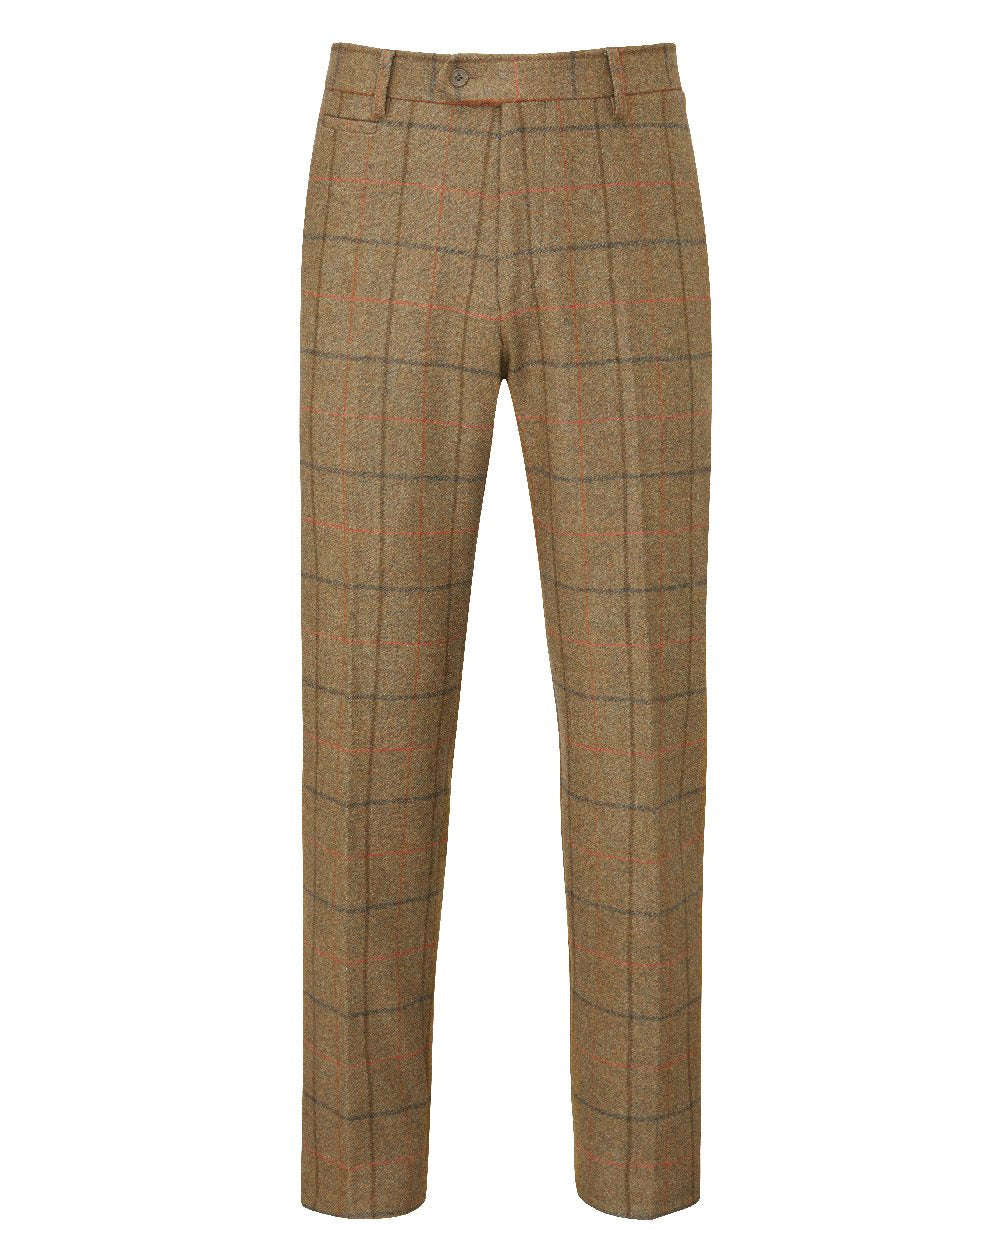 Alan Paine Combrook Mens Trousers in Thyme 